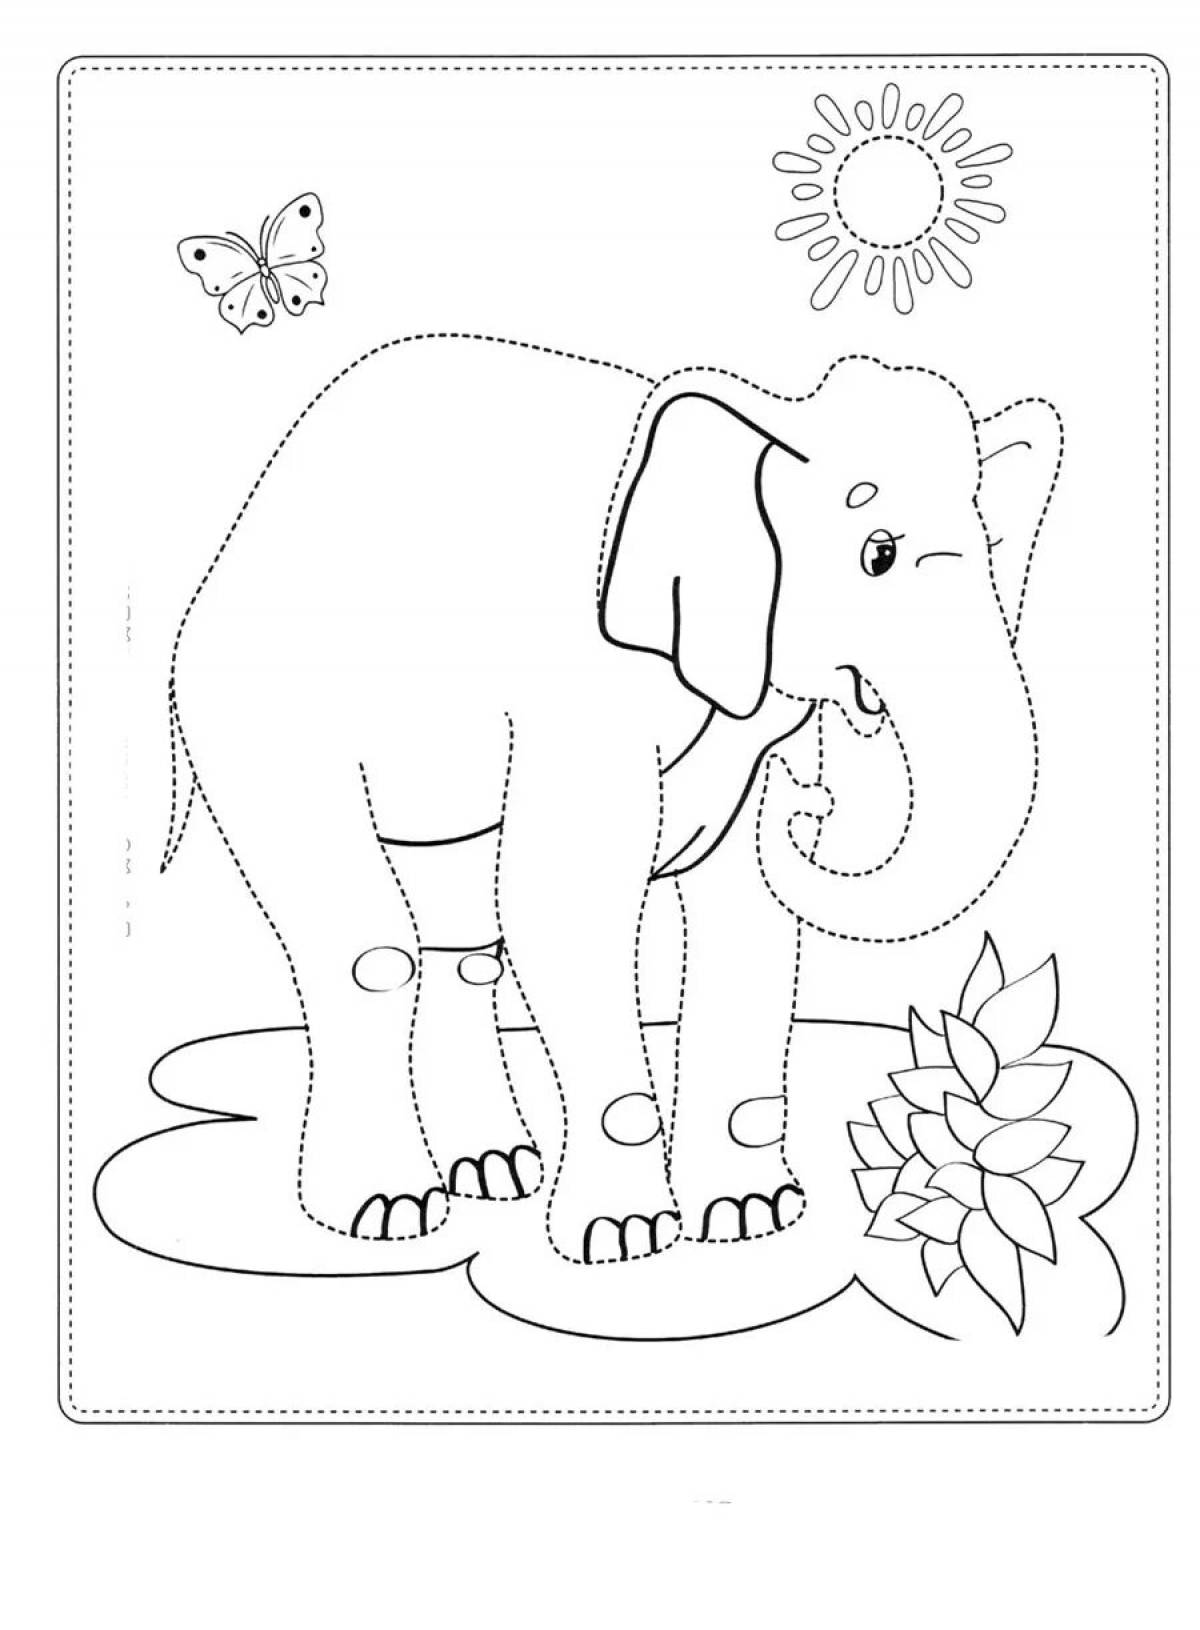 Amazing coloring mammoth for kids